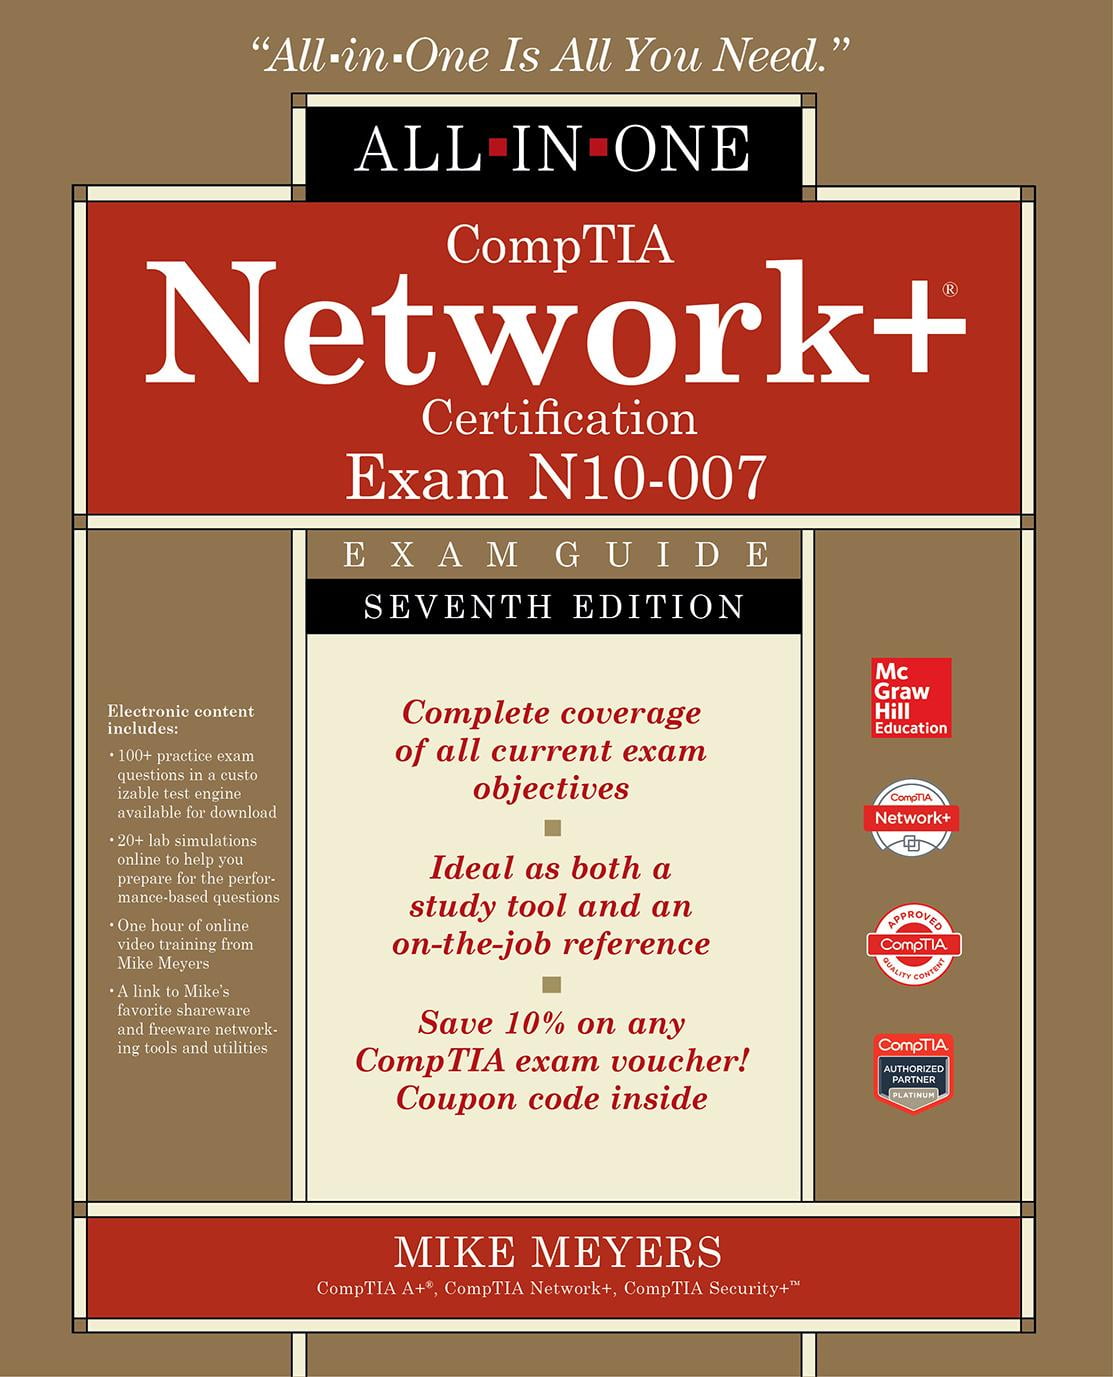 Comptia Network+ Certification All-In-One Exam Guide, Seventh Edition (Exam N10-007) (Hardcover ...